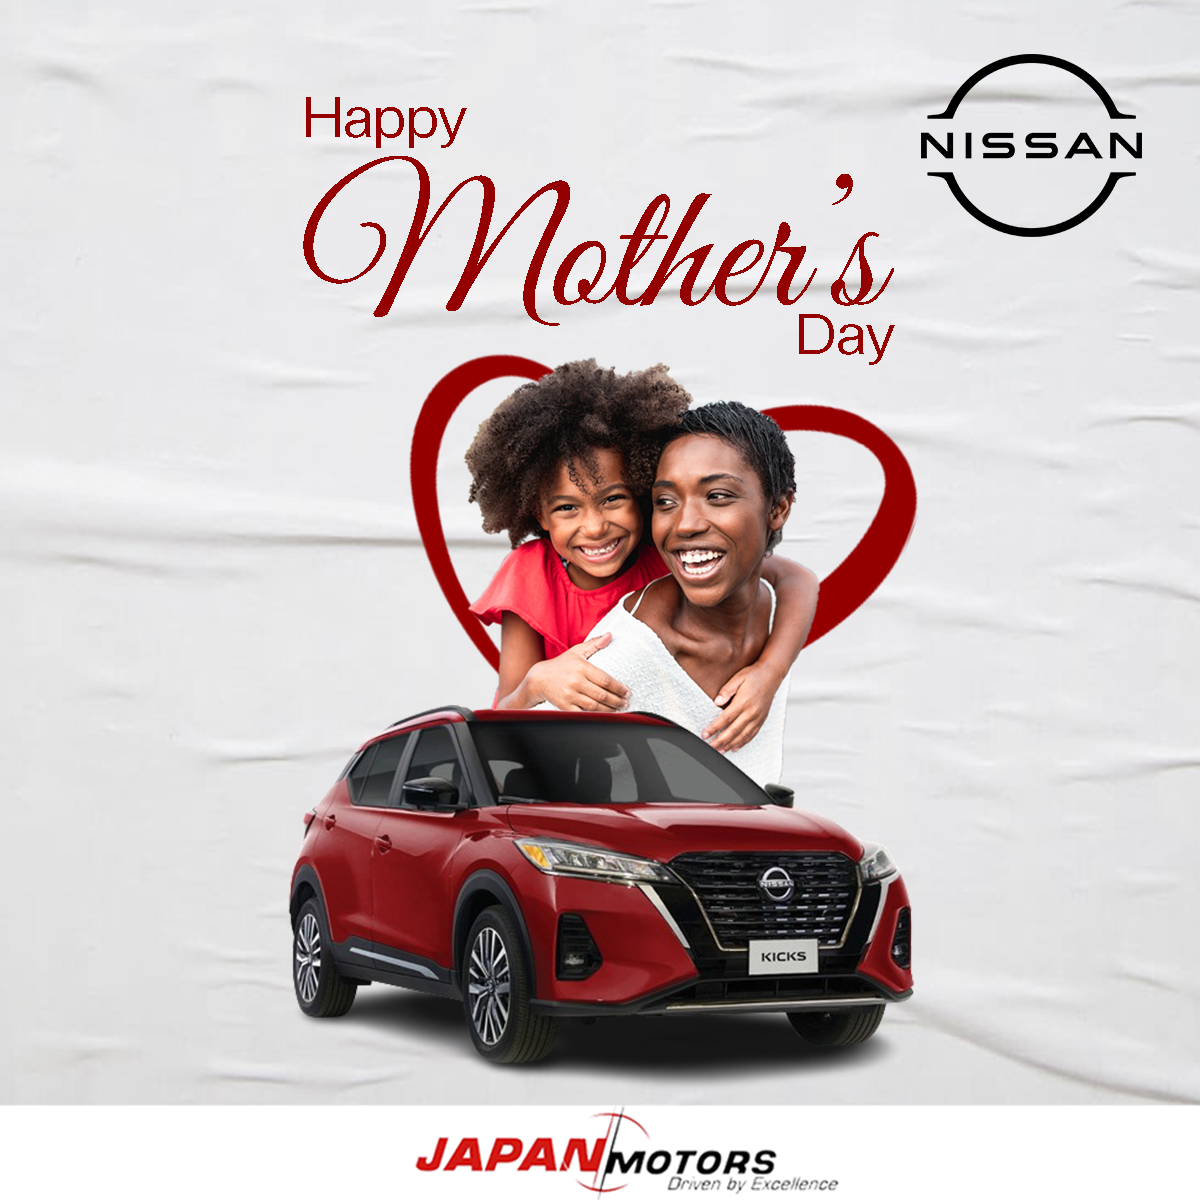 A wonderful time to celebrate our greatest cheerleaders. Nissan Ghana wishes all women a Happy Mothers Day.💐💕 #JapanMotors #NissanGhana #Nissan #MothersDay #NissanCares #roadsefty #vehcilecare